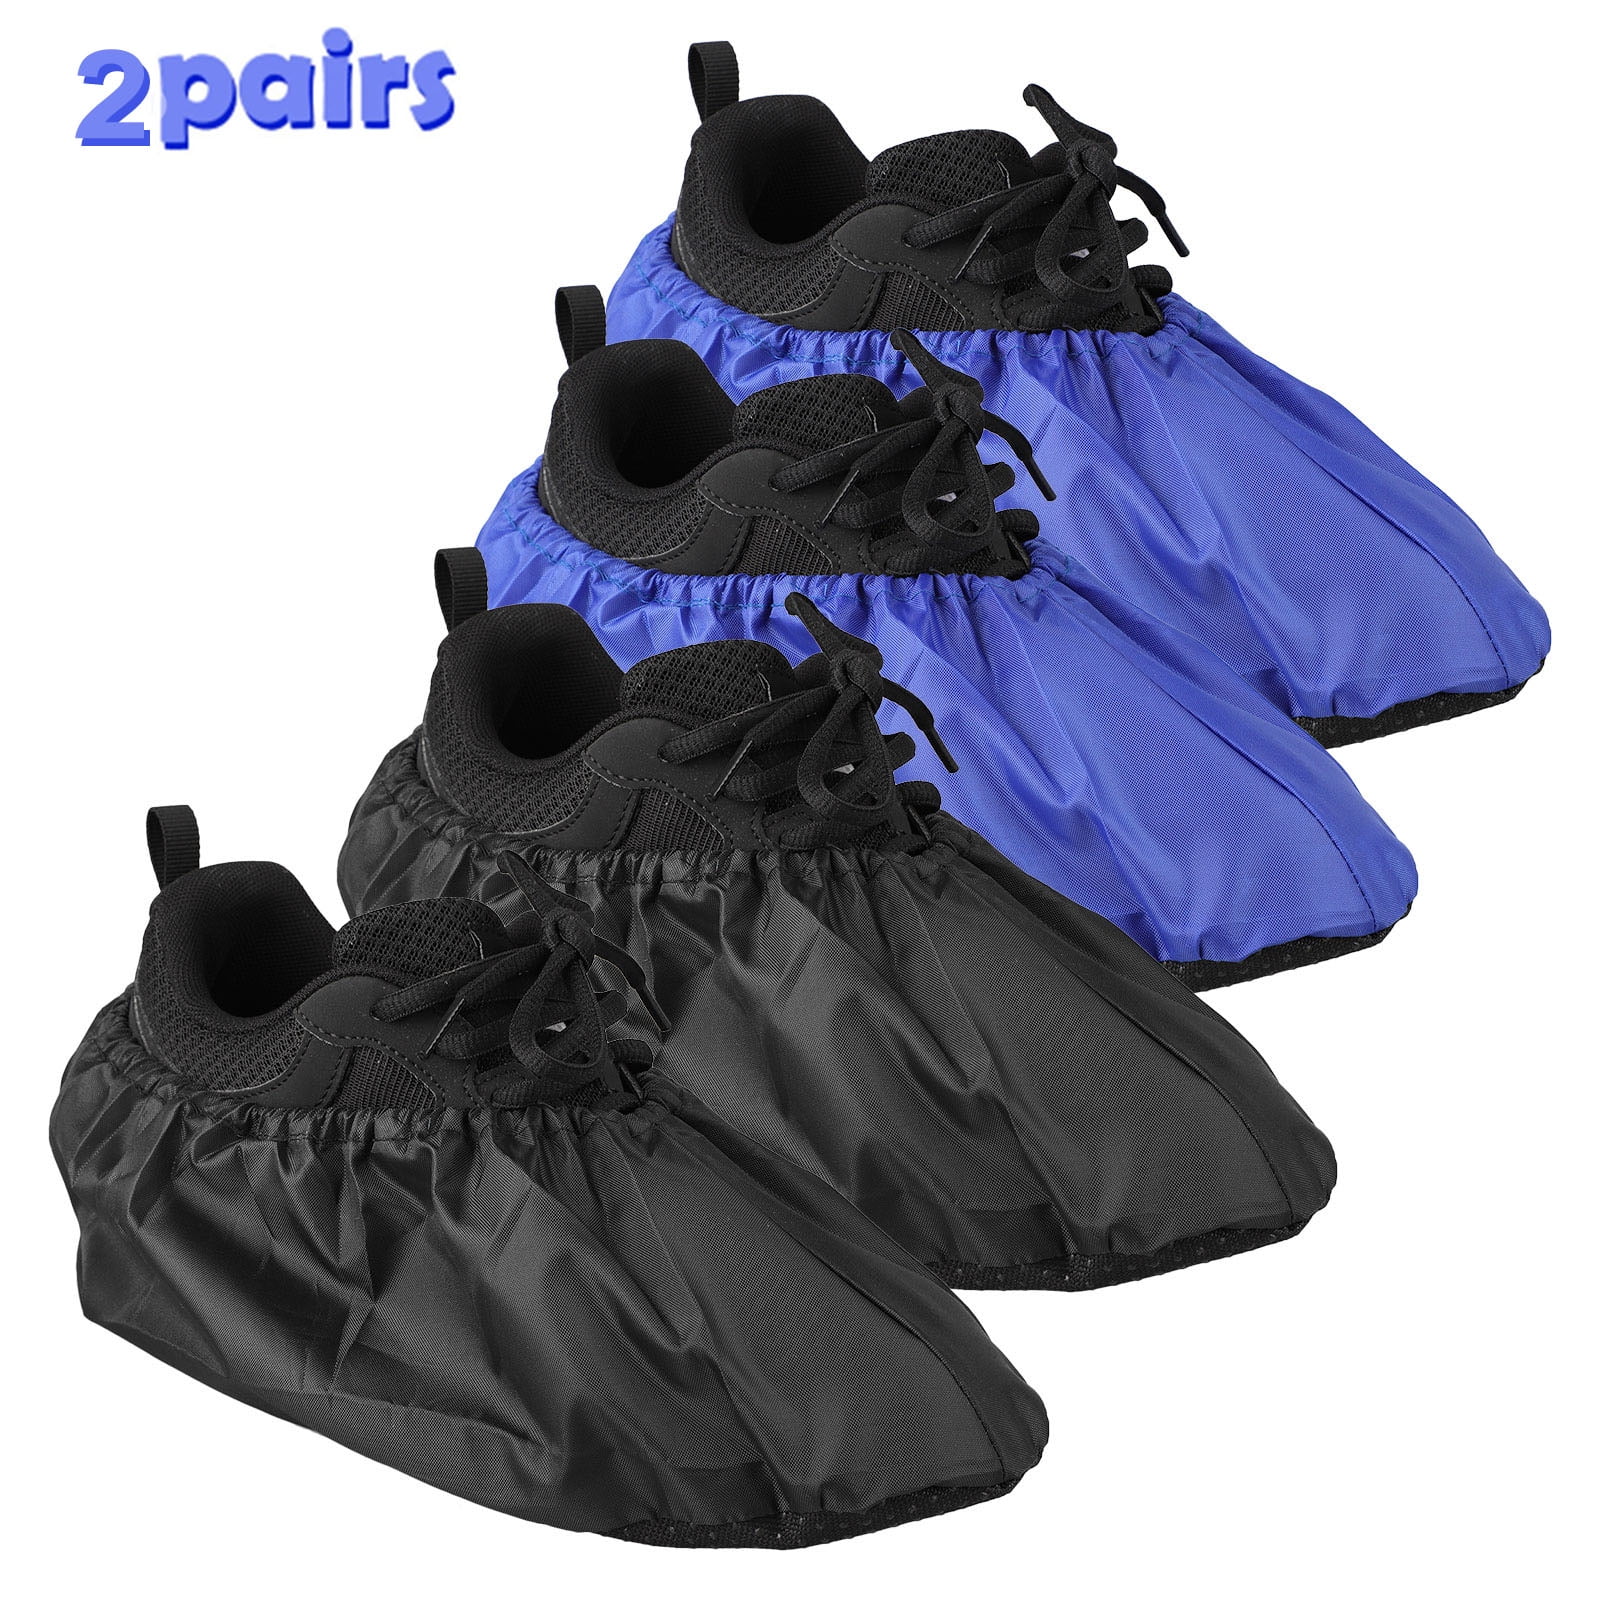 8 Pairs Non Slip Reusable Shoe Covers Waterproof Boot Covers 11.8 x 4.7 inch 